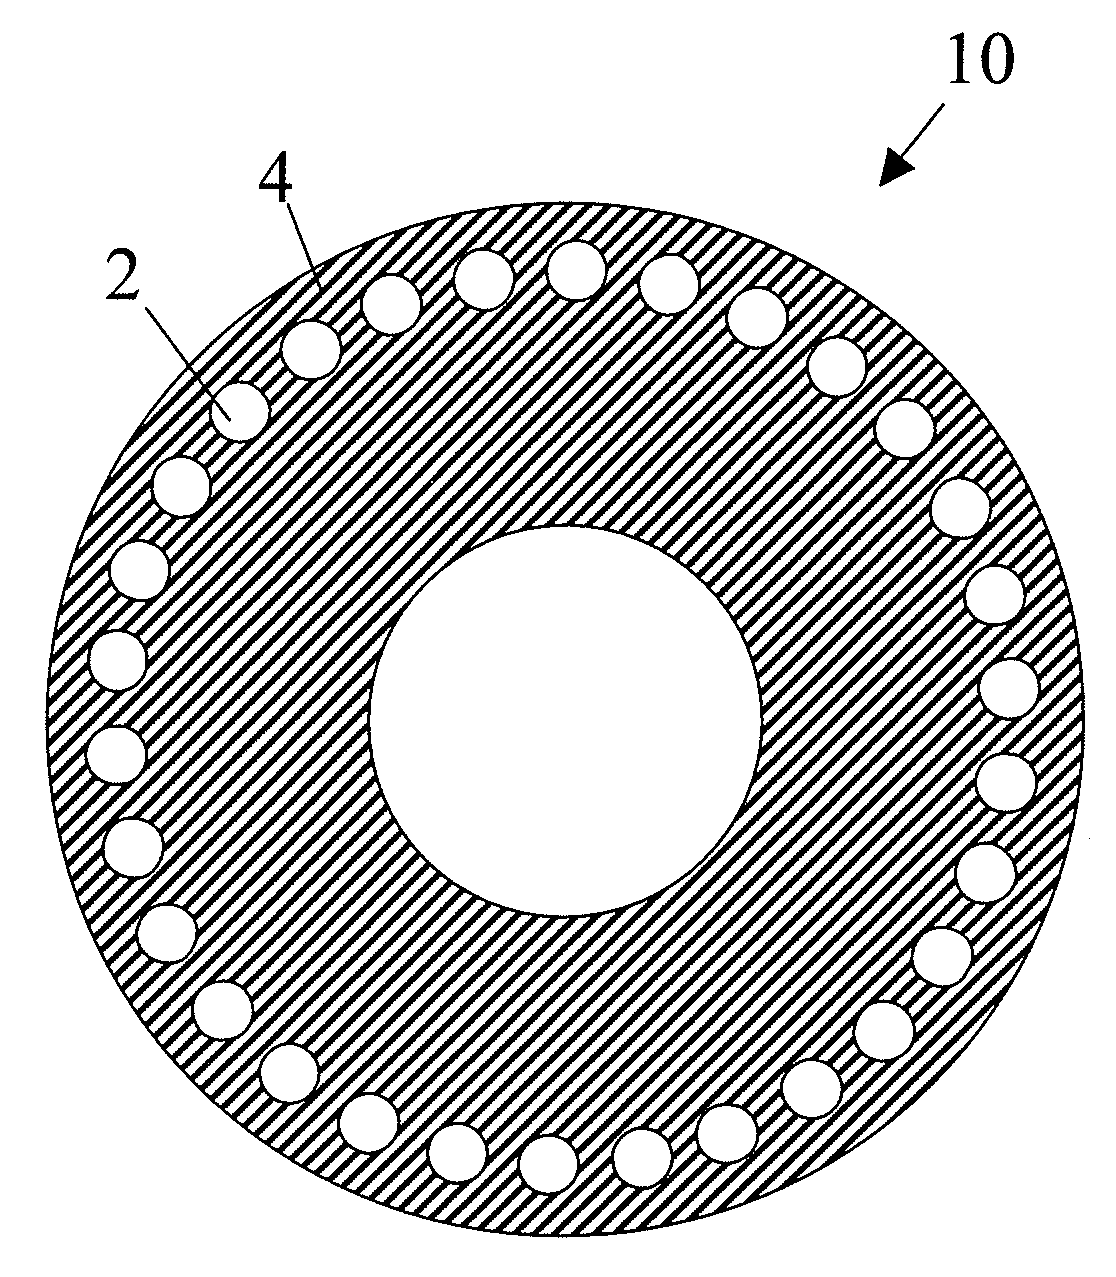 Squirrel-cage rotor for induction motor